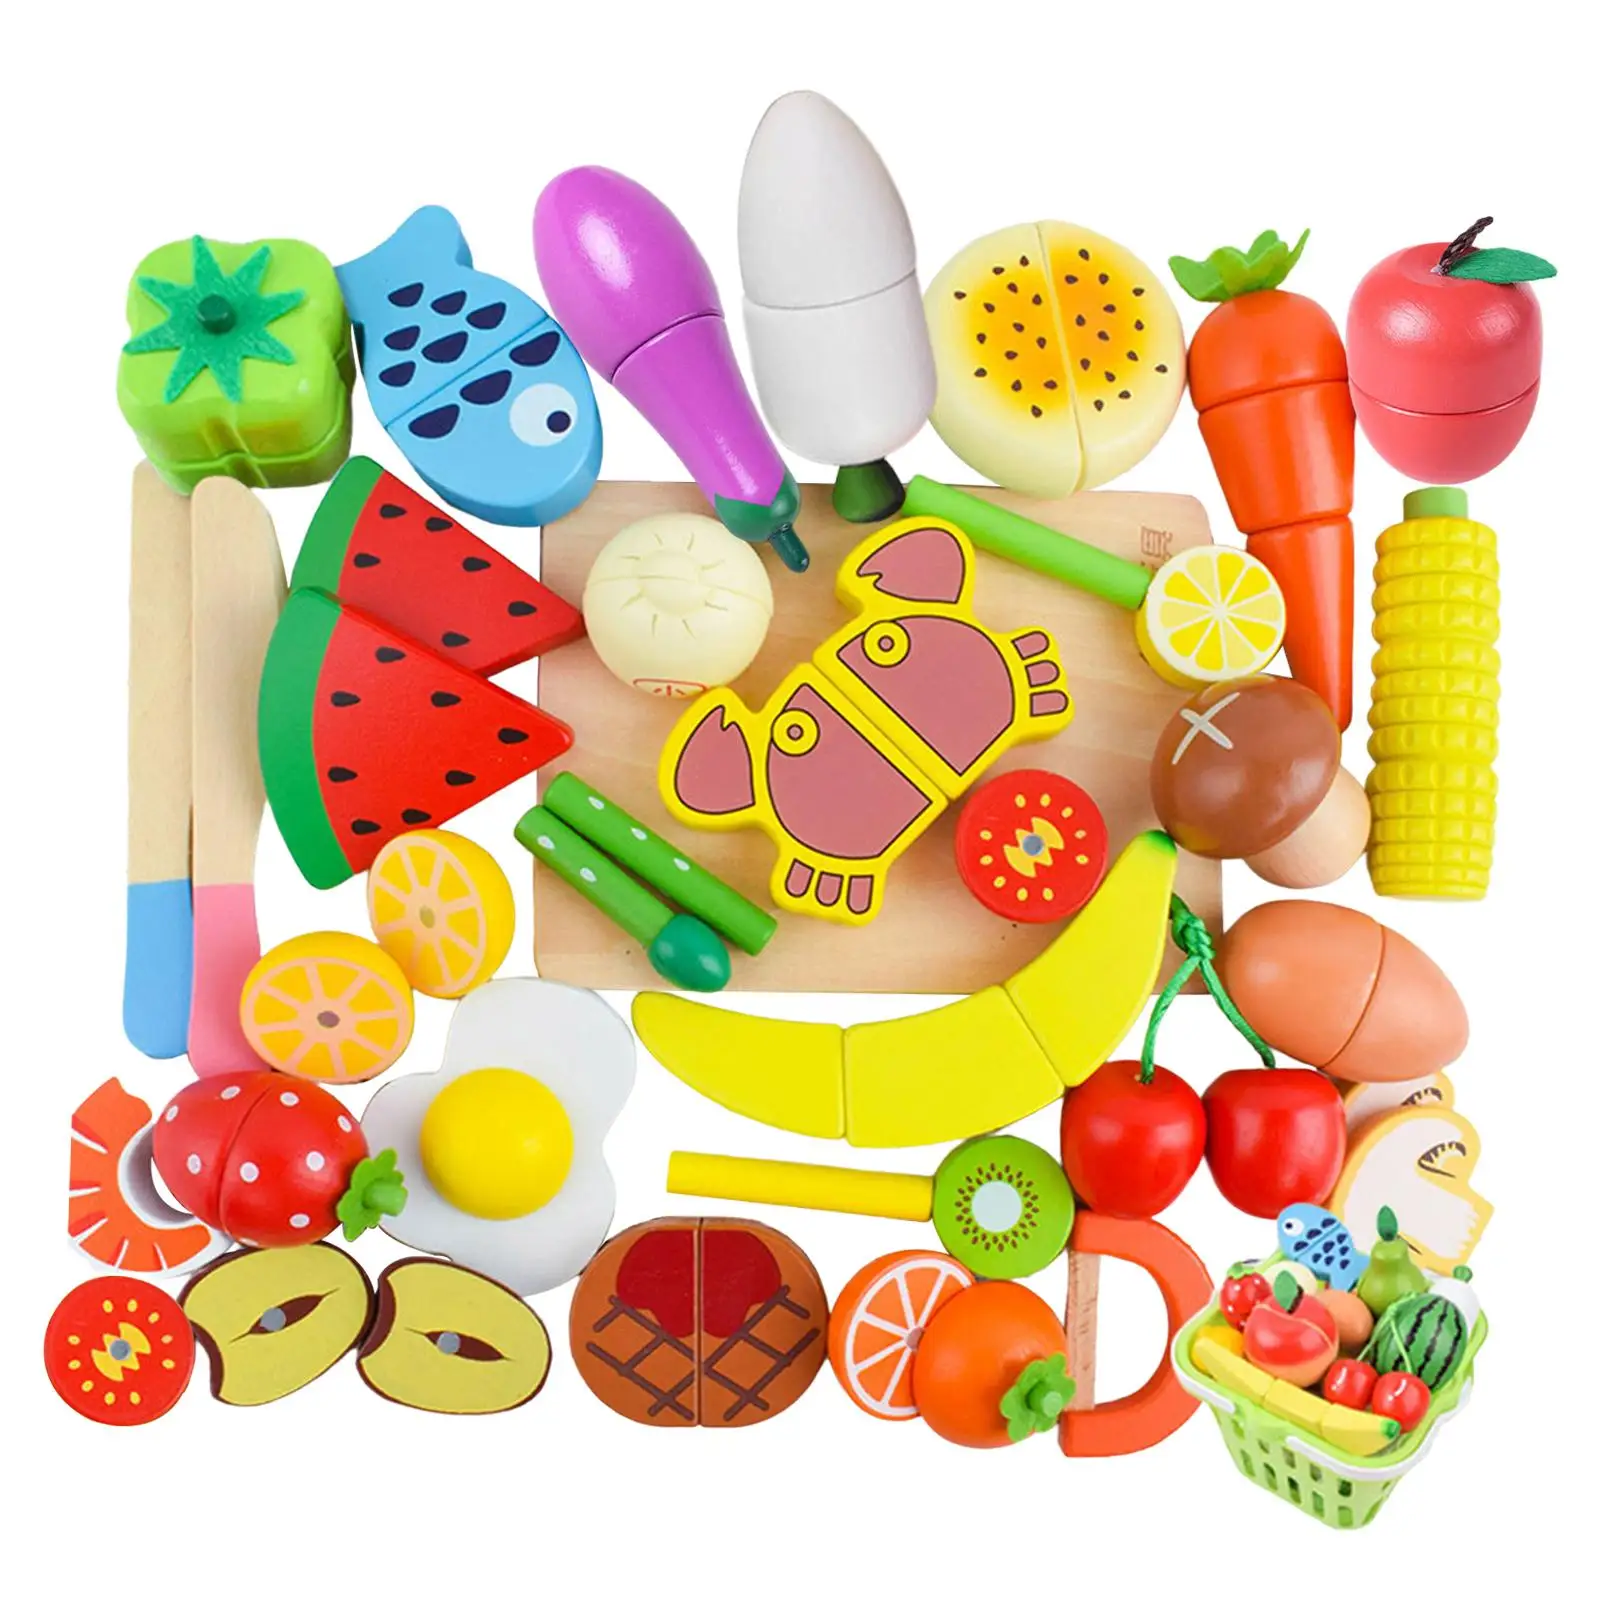 35Pcs Cutting Fruit Vegetables for Kids Play Kitchen Toys Gift Cooking Kitchen Toys with Basket for Boys Kids Girls 3 Years Old